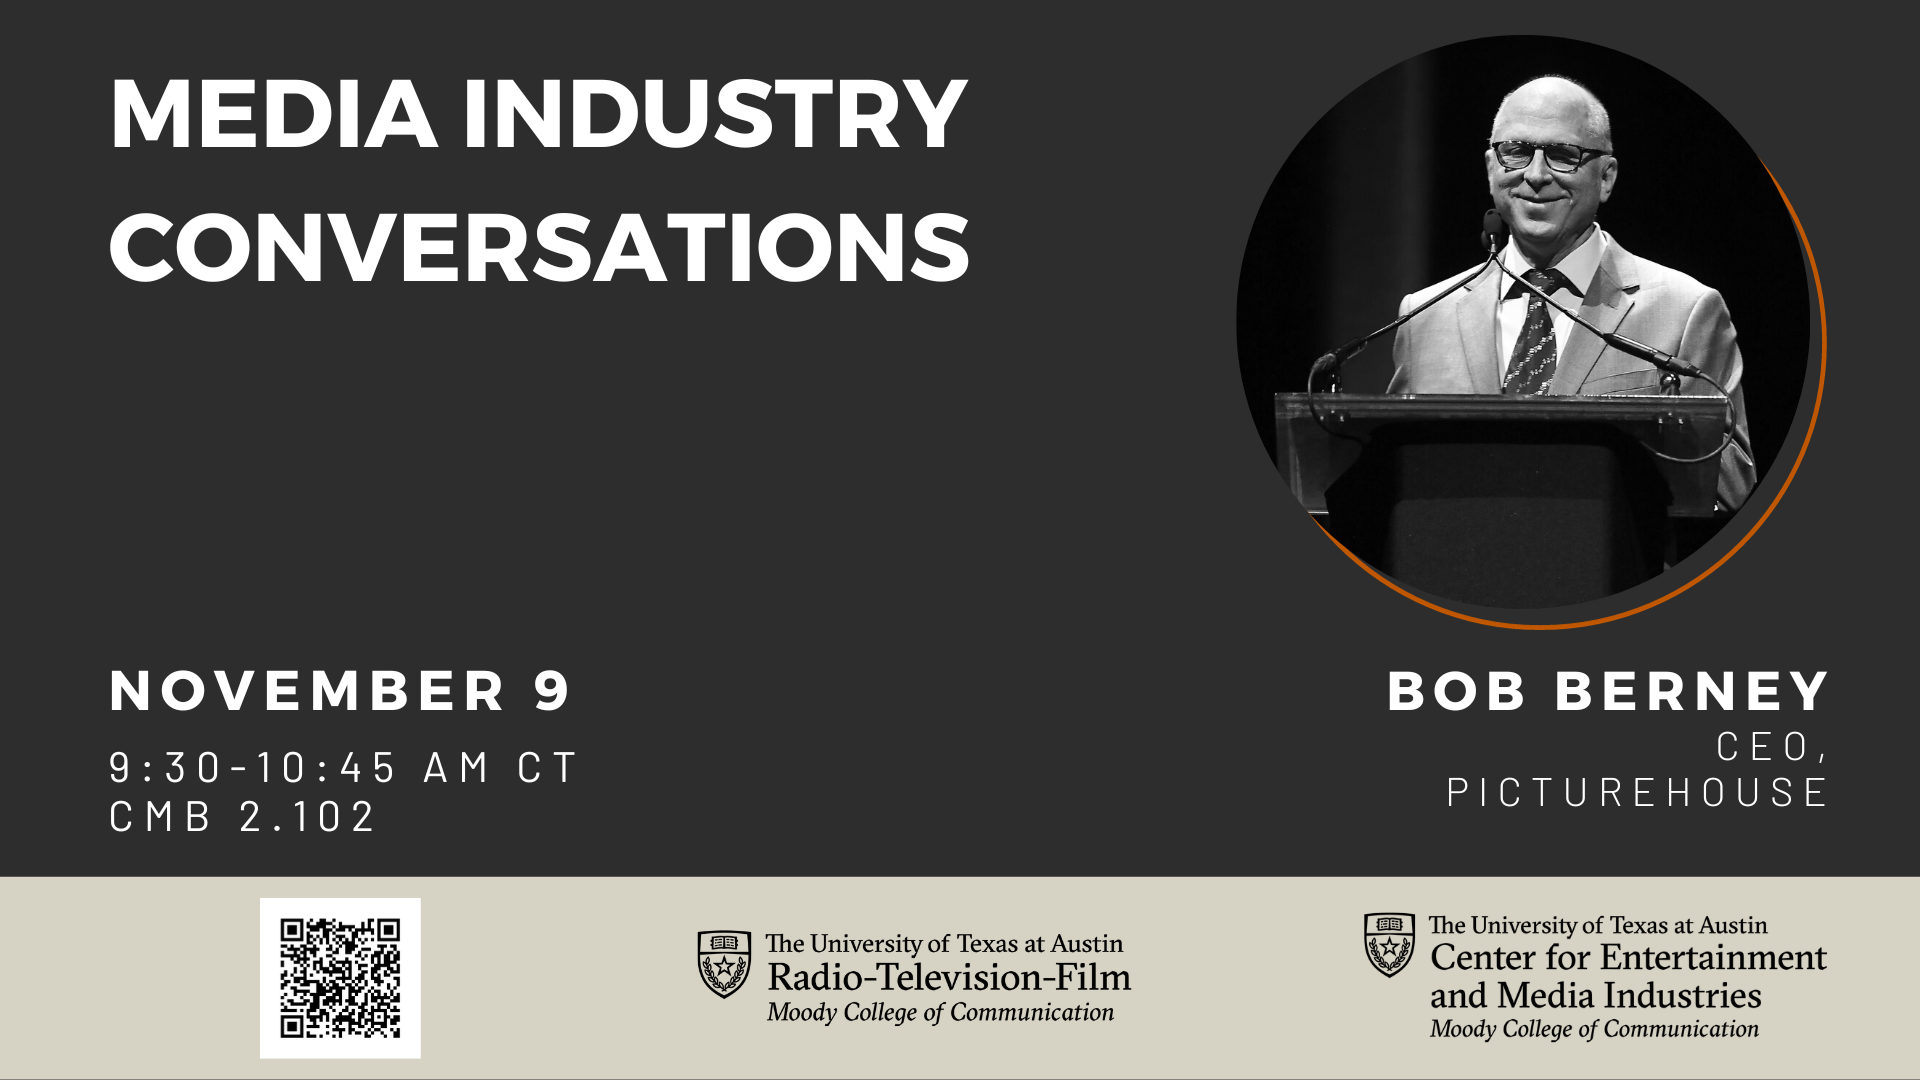 MIC, Bob Berney, CEO of Picturehouse, 9:30am-10:45am, November 9, CMB 2.102